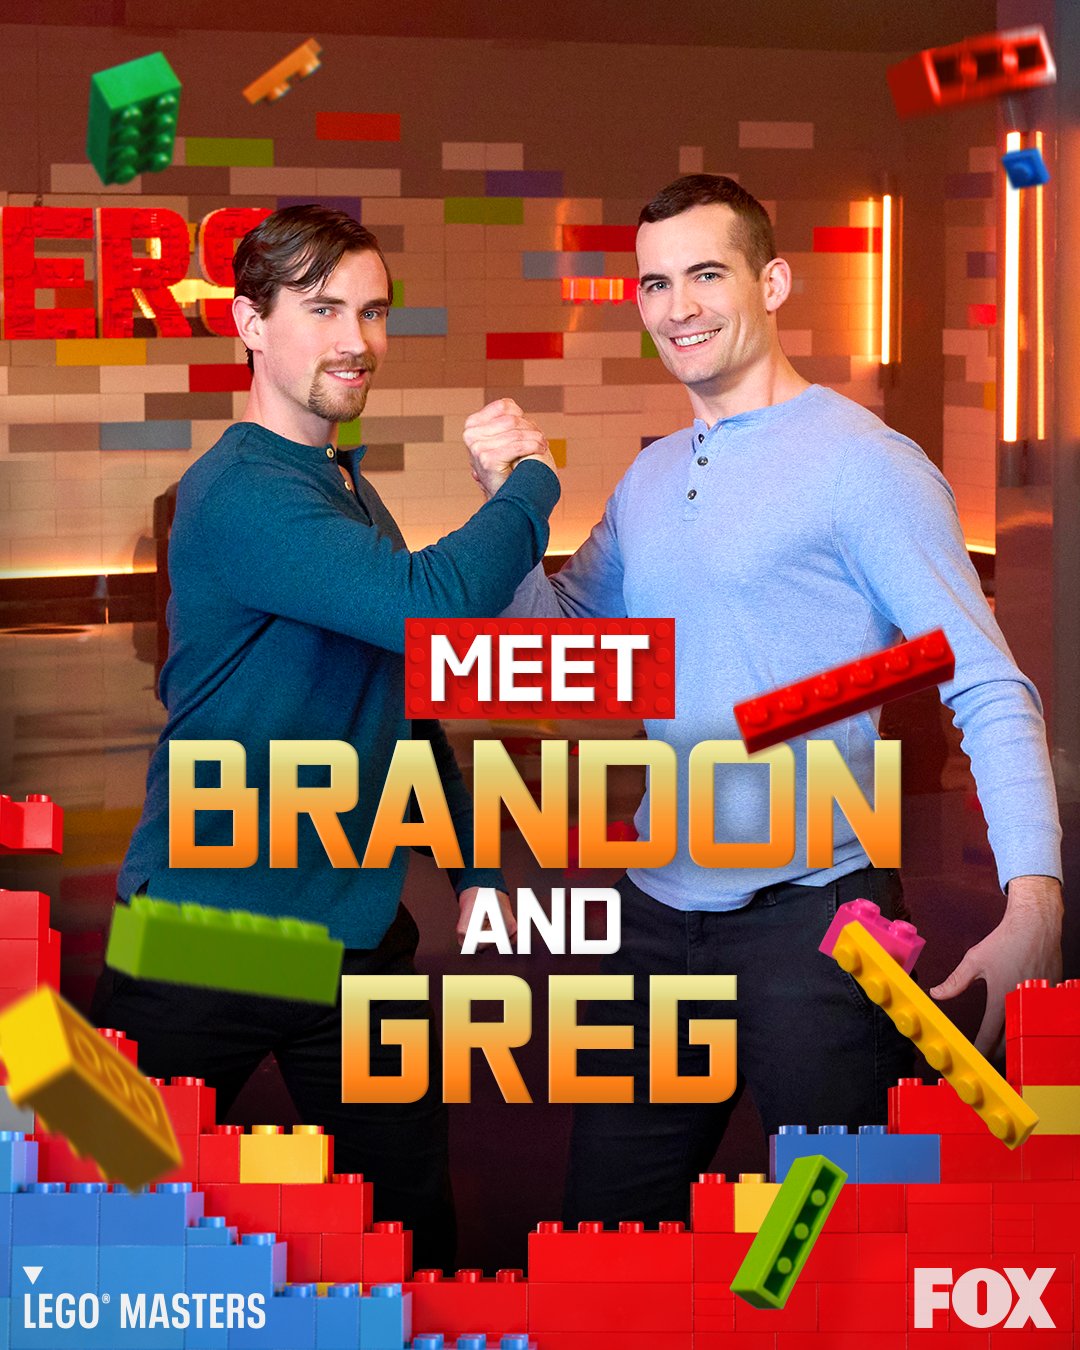 LEGO Masters FOX on Twitter: "The is in these duos are ready to Meet your Season 3 contestants.👇 #LEGOMastersFOX https://t.co/QQCw2BKu4I" / Twitter